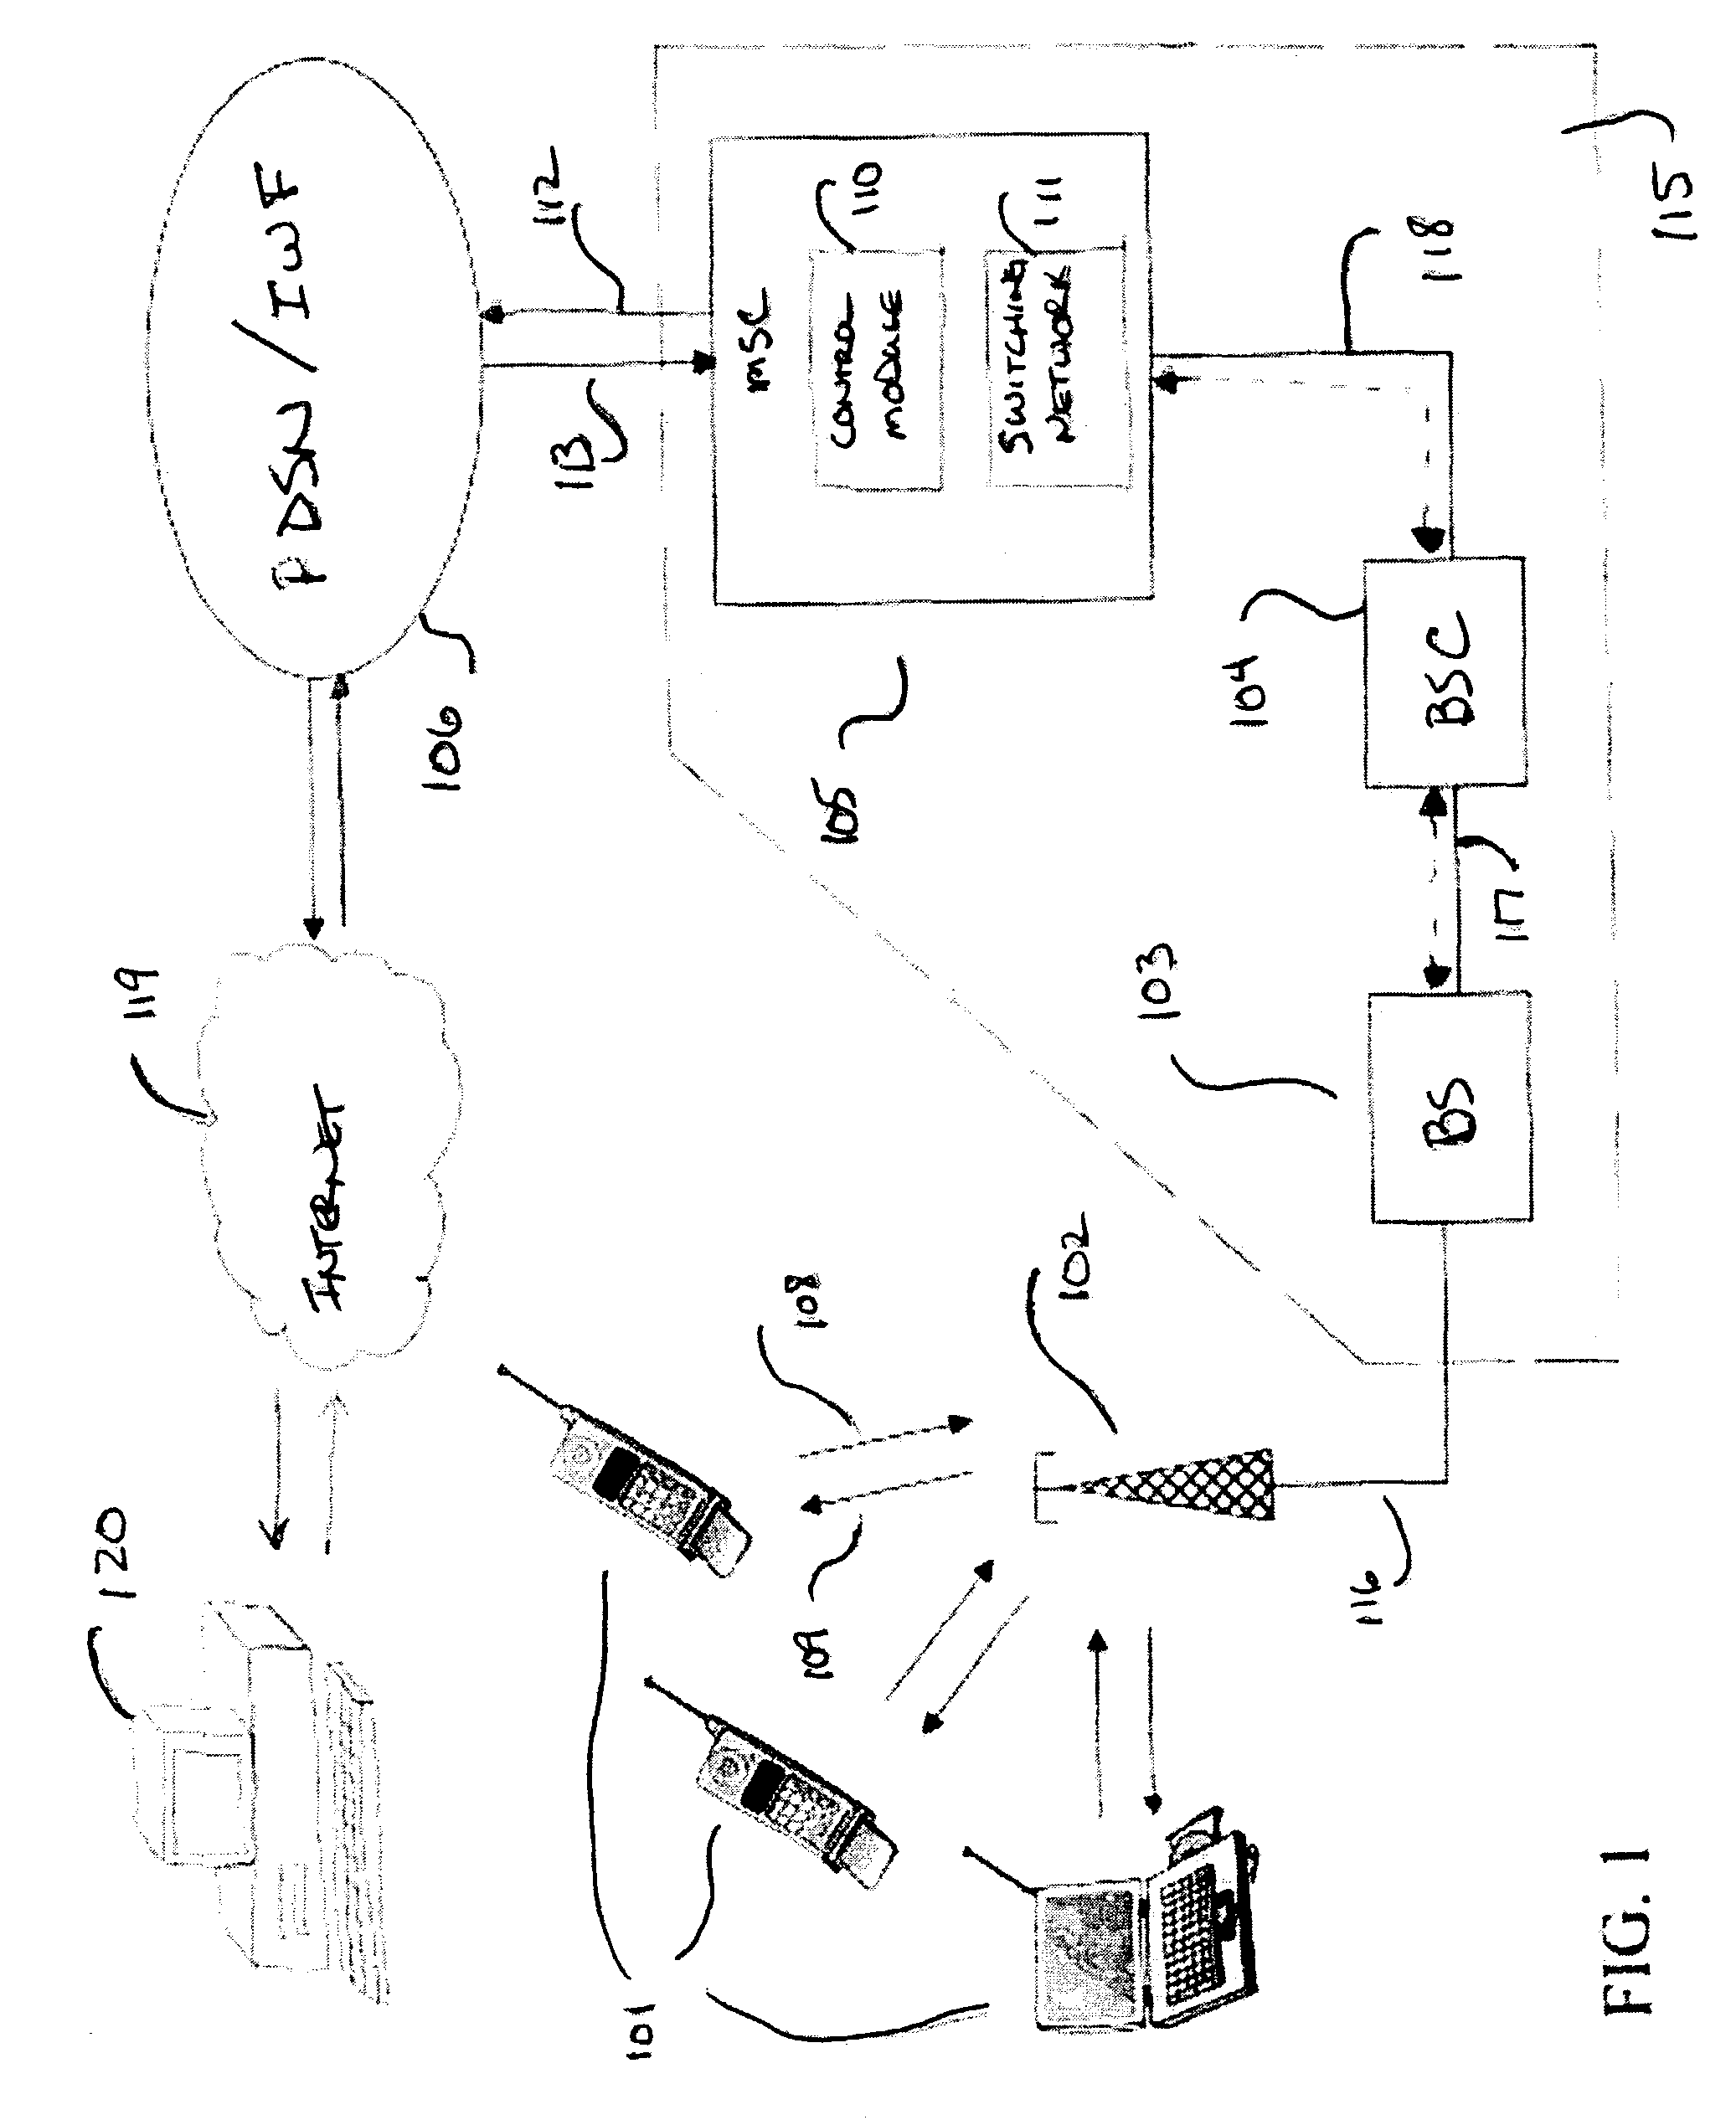 Method and apparatus for scheduling transmissions in wireless data networks